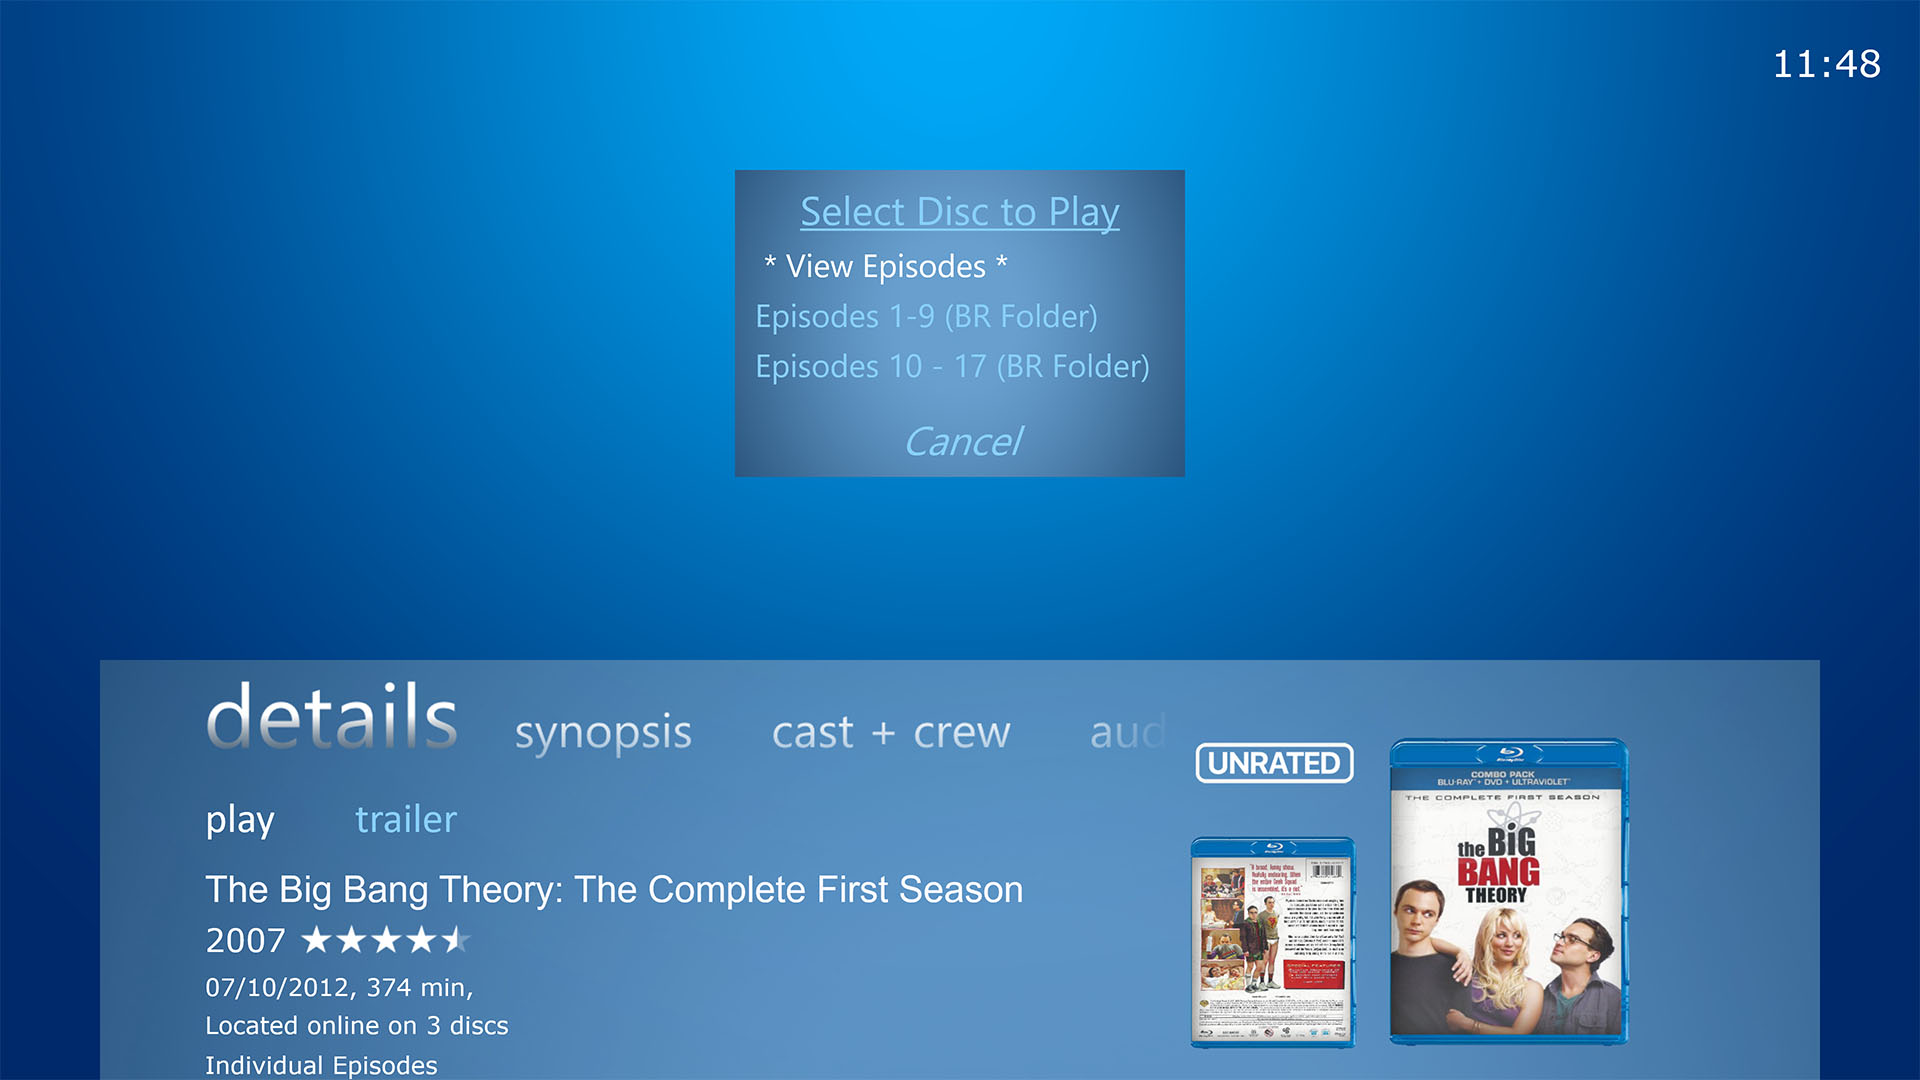 Select Play to bring up the Select Discs prompt, with optional View Episodes feature